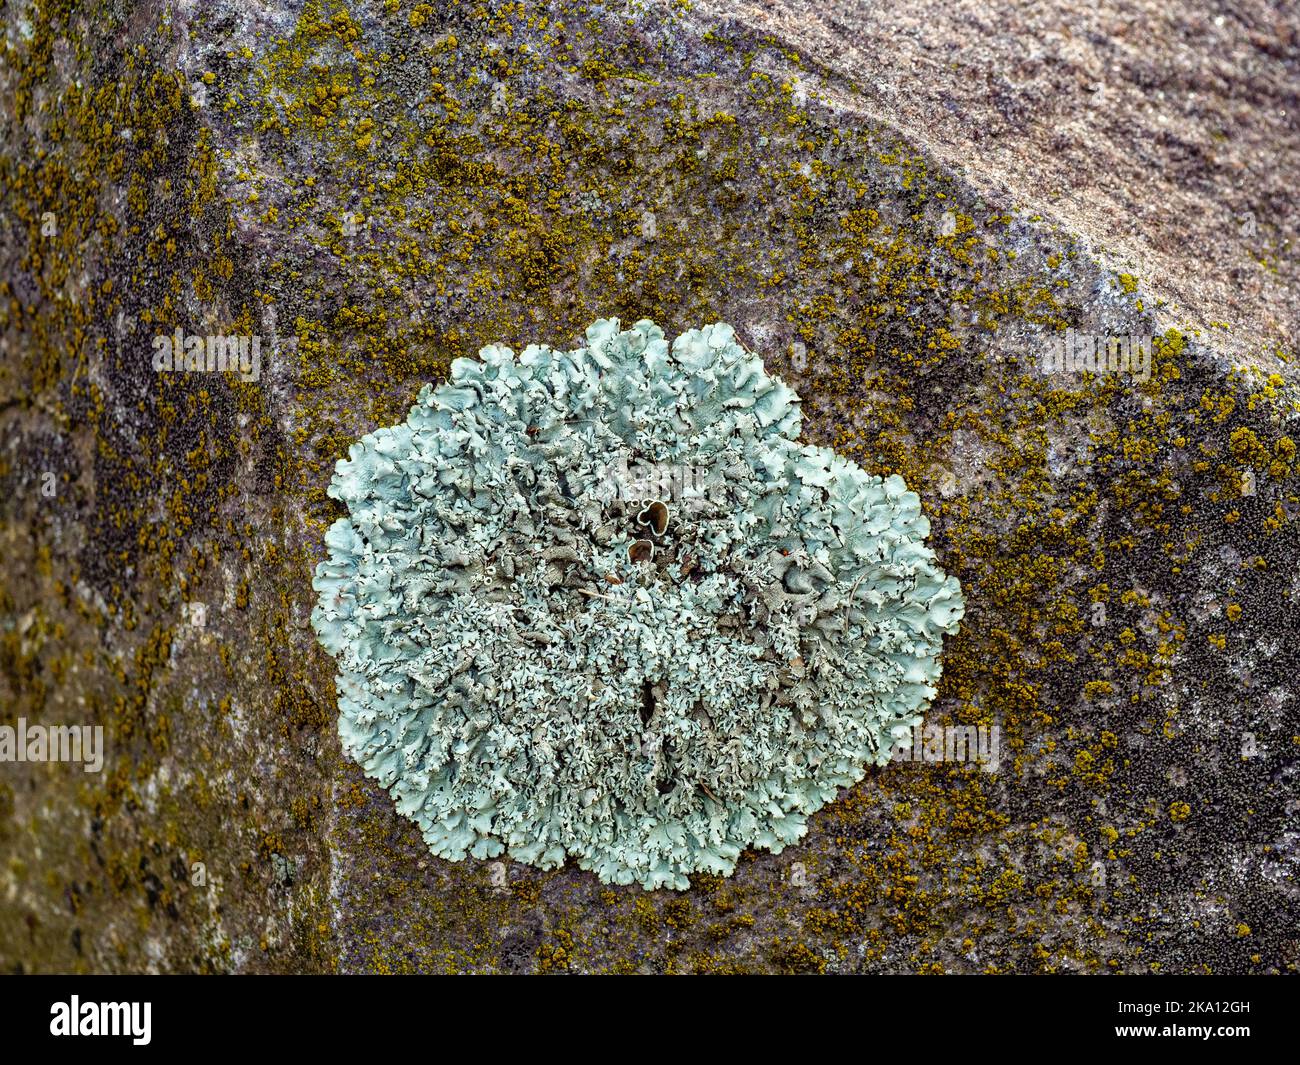 Community crustose lichen and the moss growing on stone surface Stock Photo